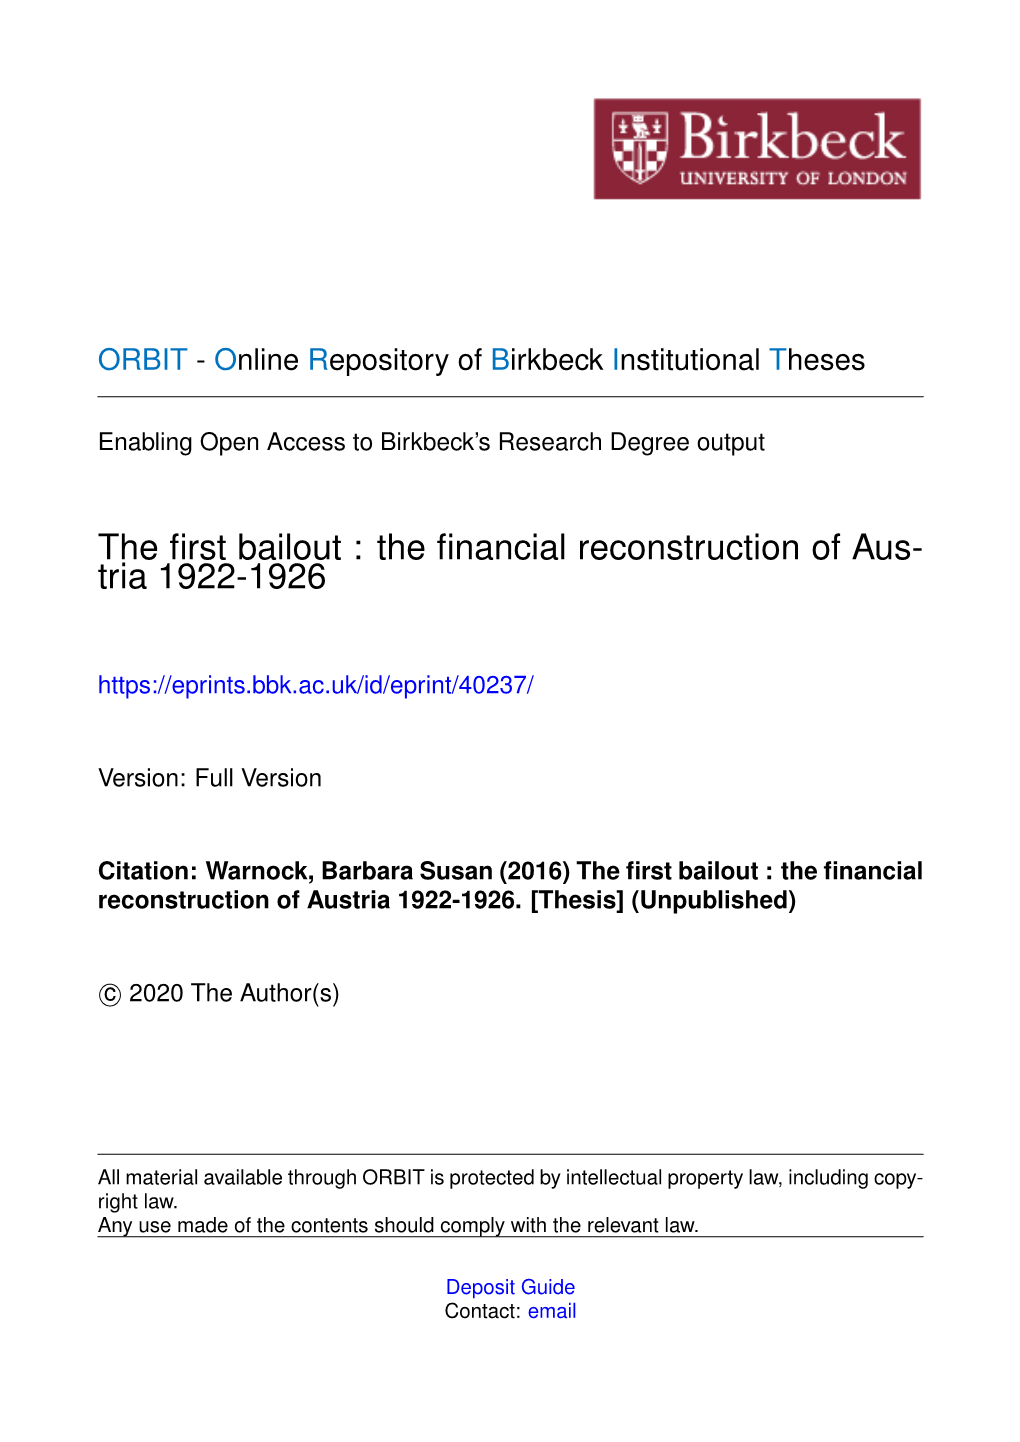 The First Bailout : the Financial Reconstruction of Aus- Tria 1922-1926